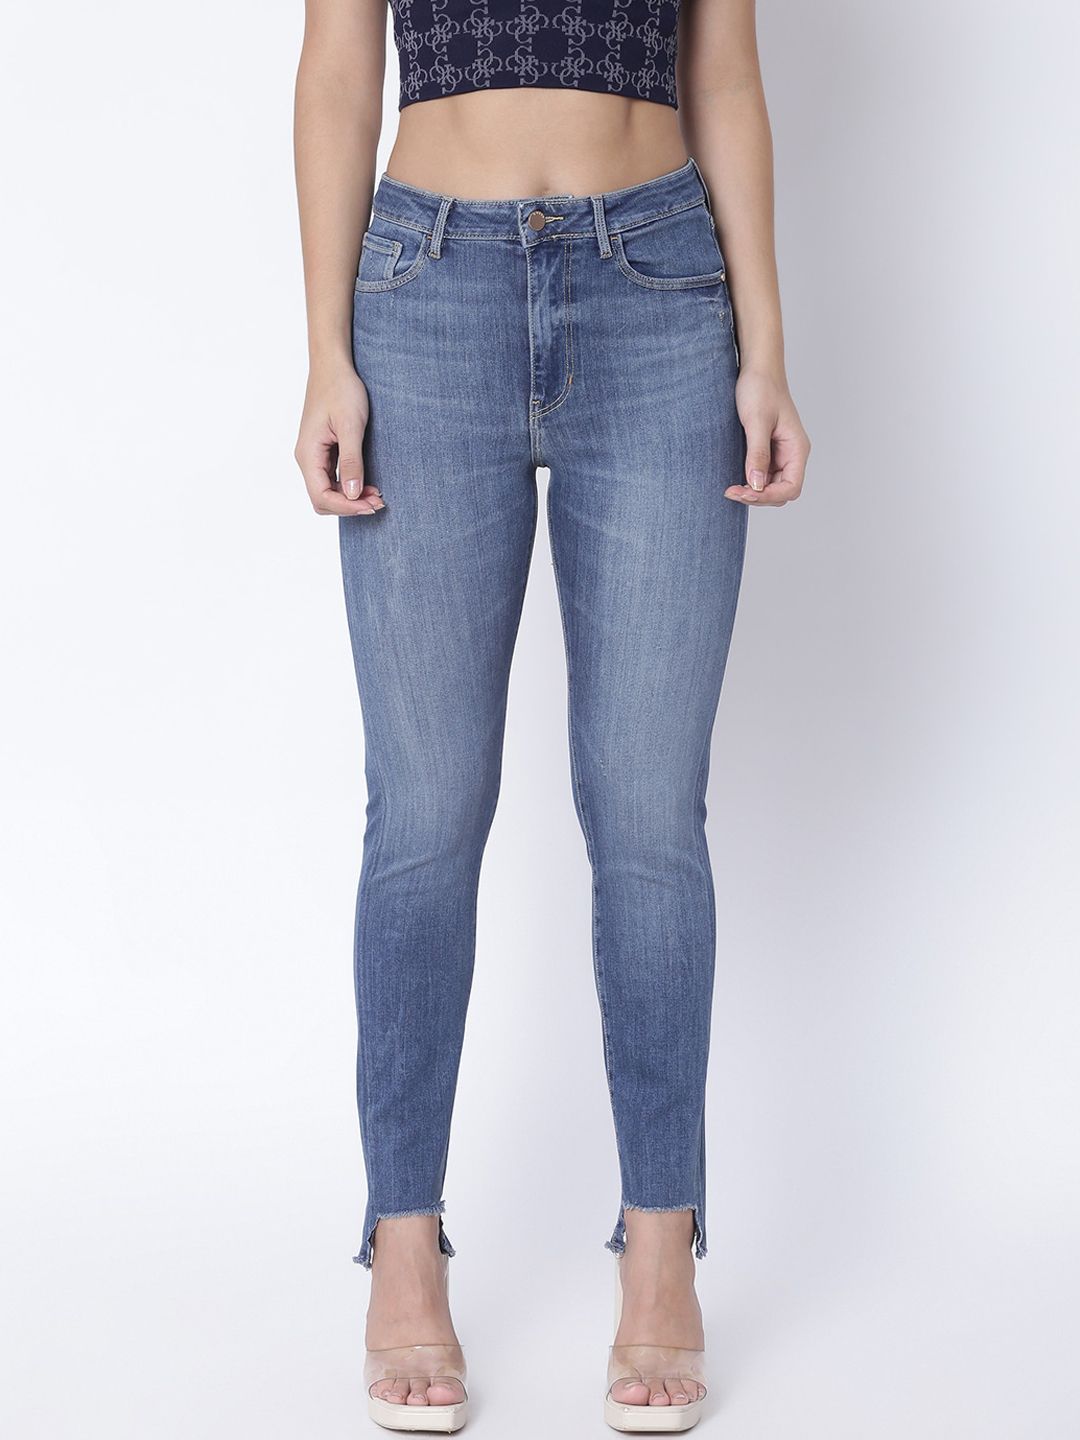 GUESS Women Blue Light Fade Jeans Price in India